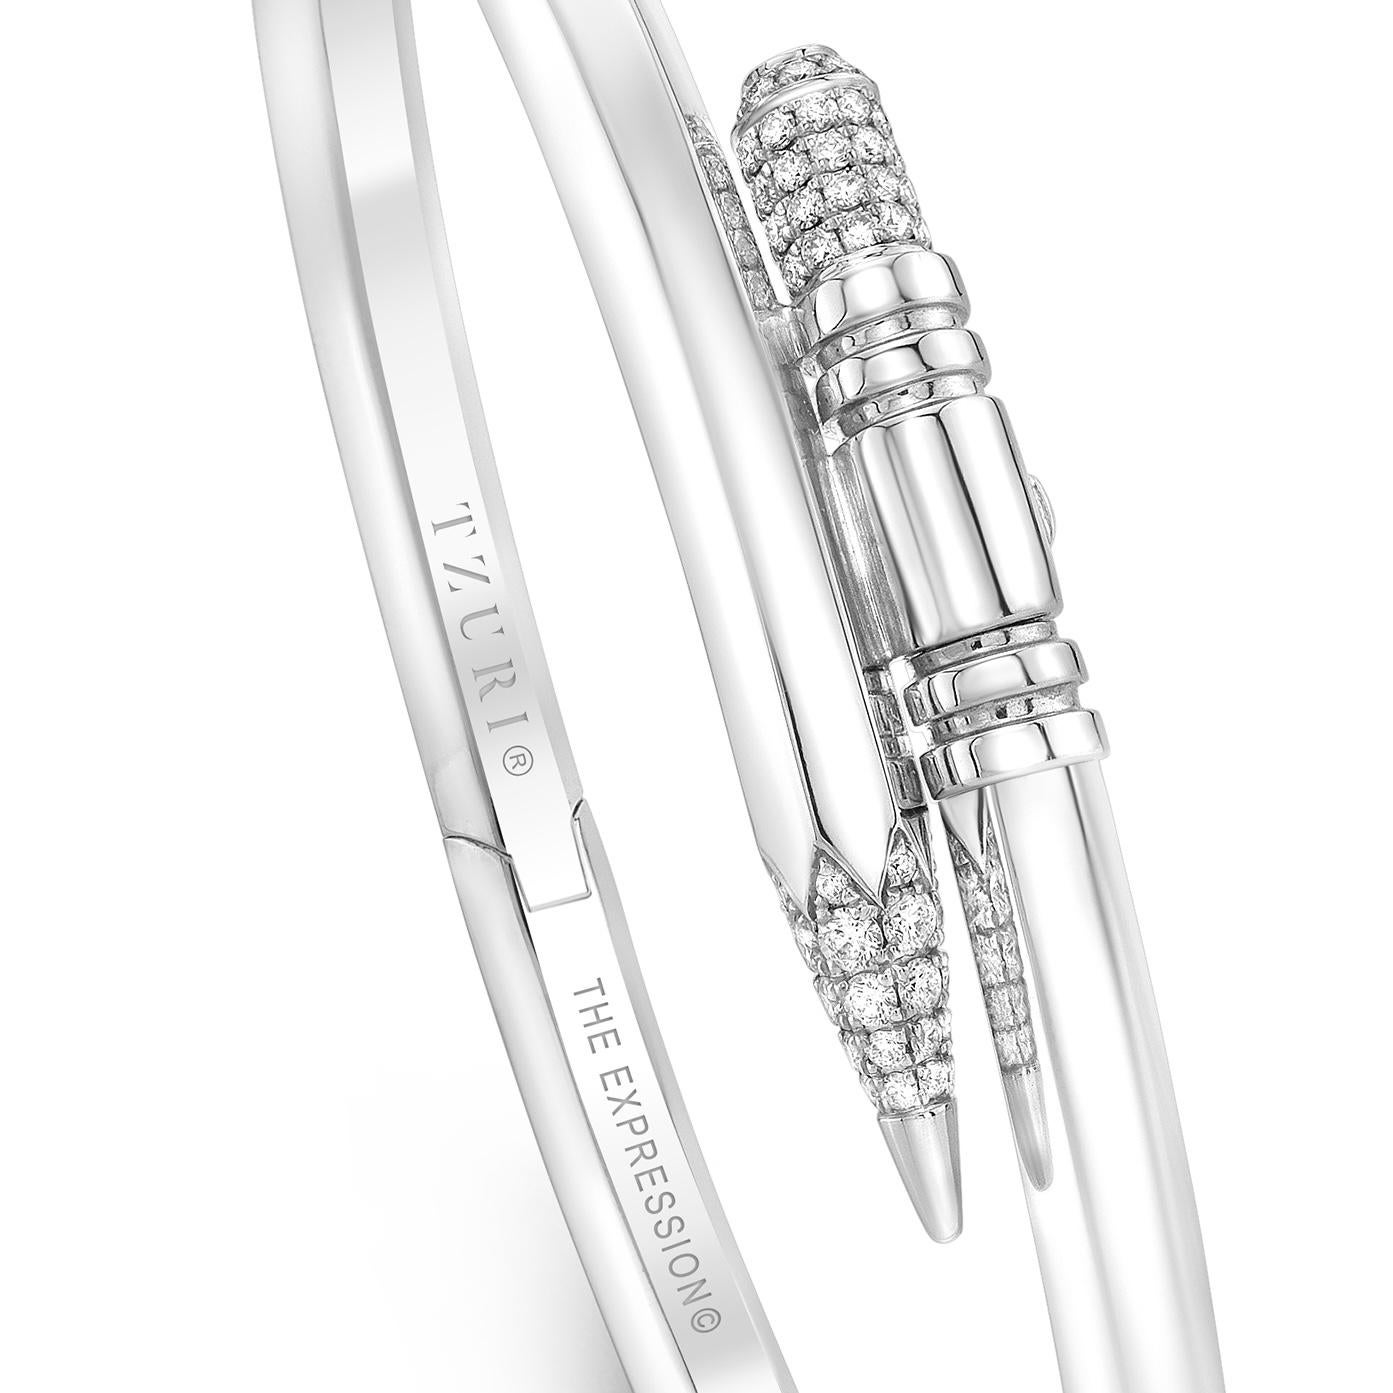 18K White Gold Small Expression Bracelet

4 mm Gauge Thickness

Weight: 0.45 ct (approx.)

Color: F-G
Clarity: VS+

Bracelets are produced in limited editions of 500 units, per design, annually. They are engraved with the serial number and signature